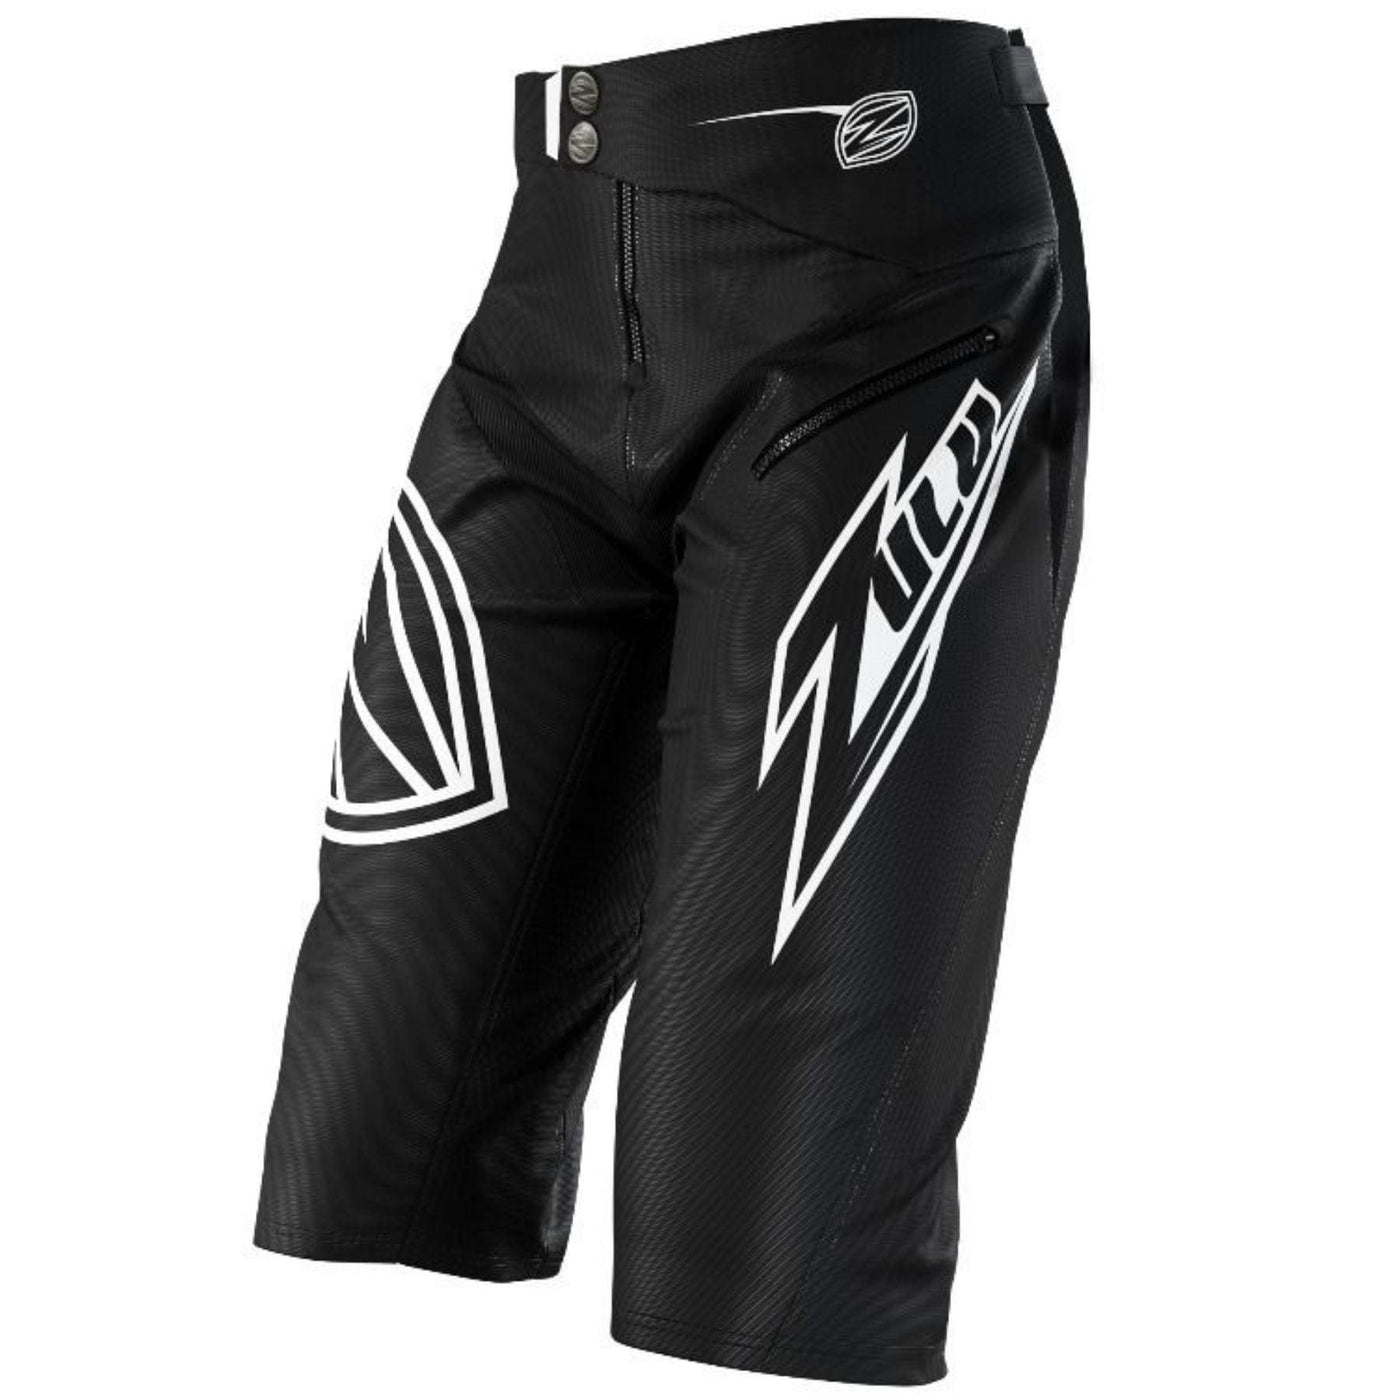 ZULU Shorts Shield - Black/White With Pocket 8Lines Shop - Fast Shipping